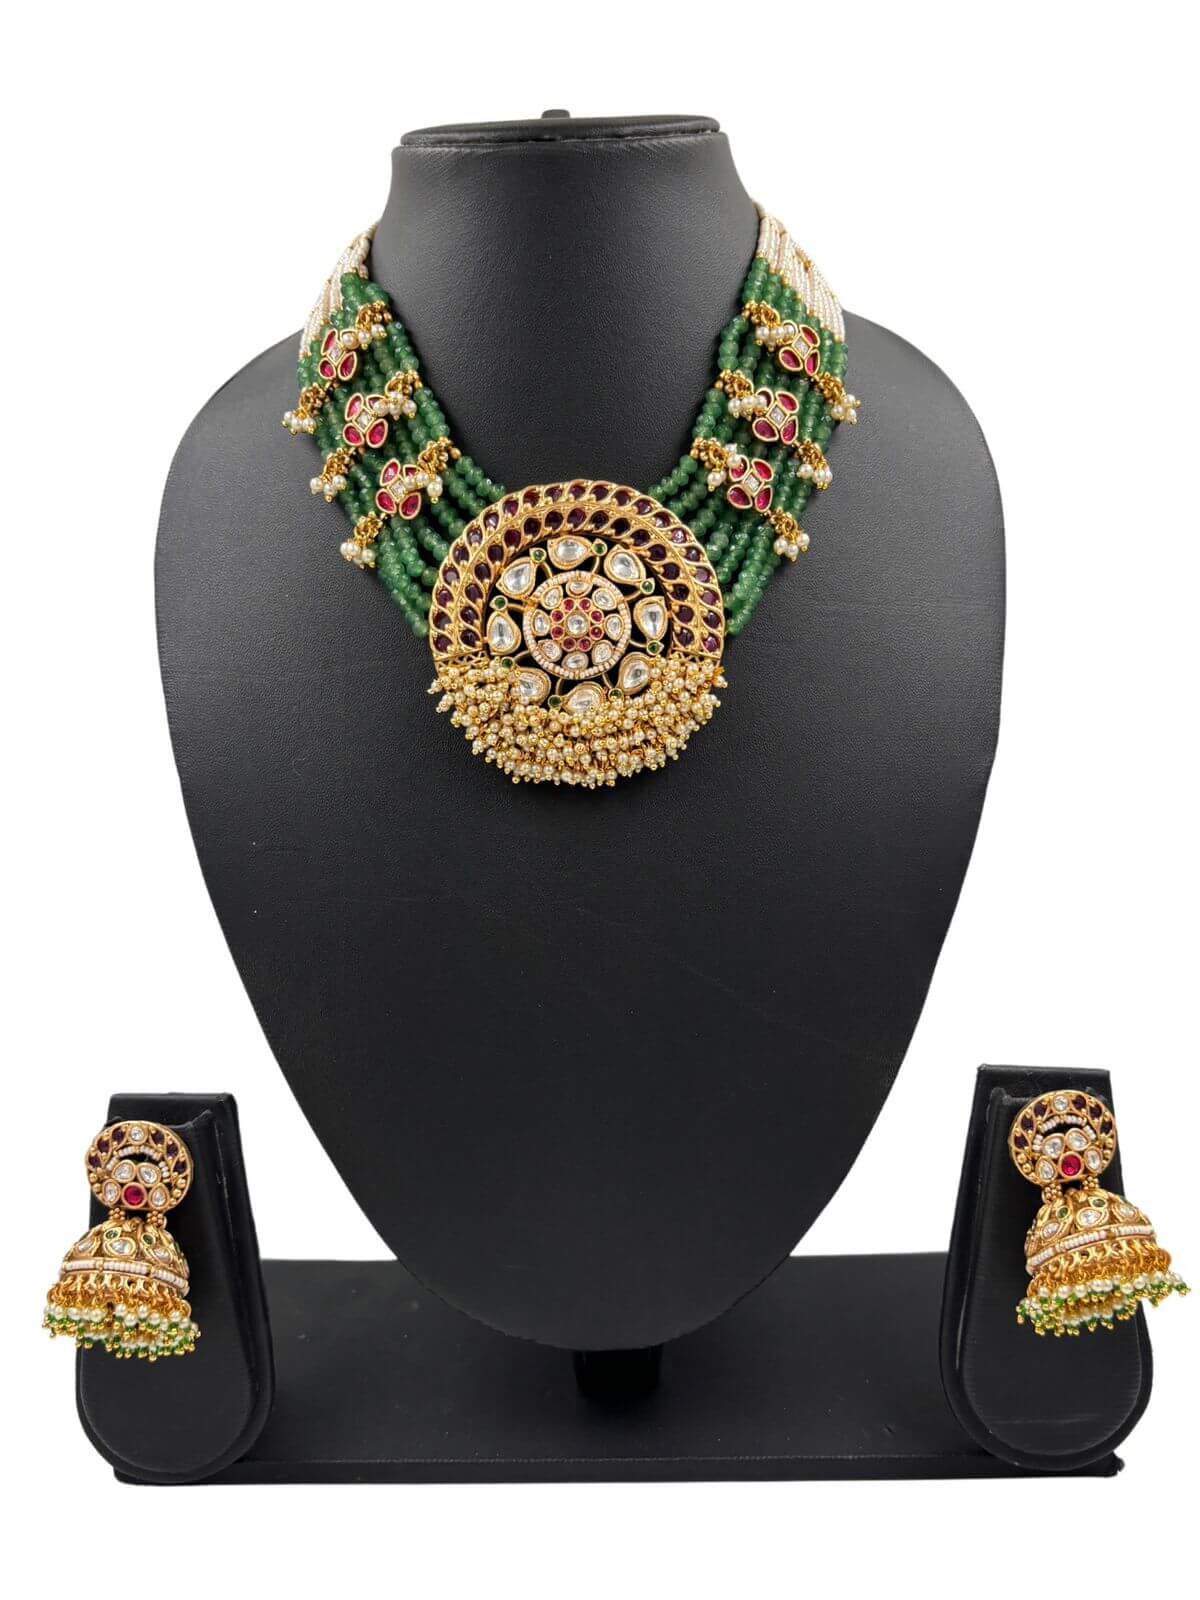 Roshni Designer Gold Plated Short Antique Necklace With Layered Green jadeBeads